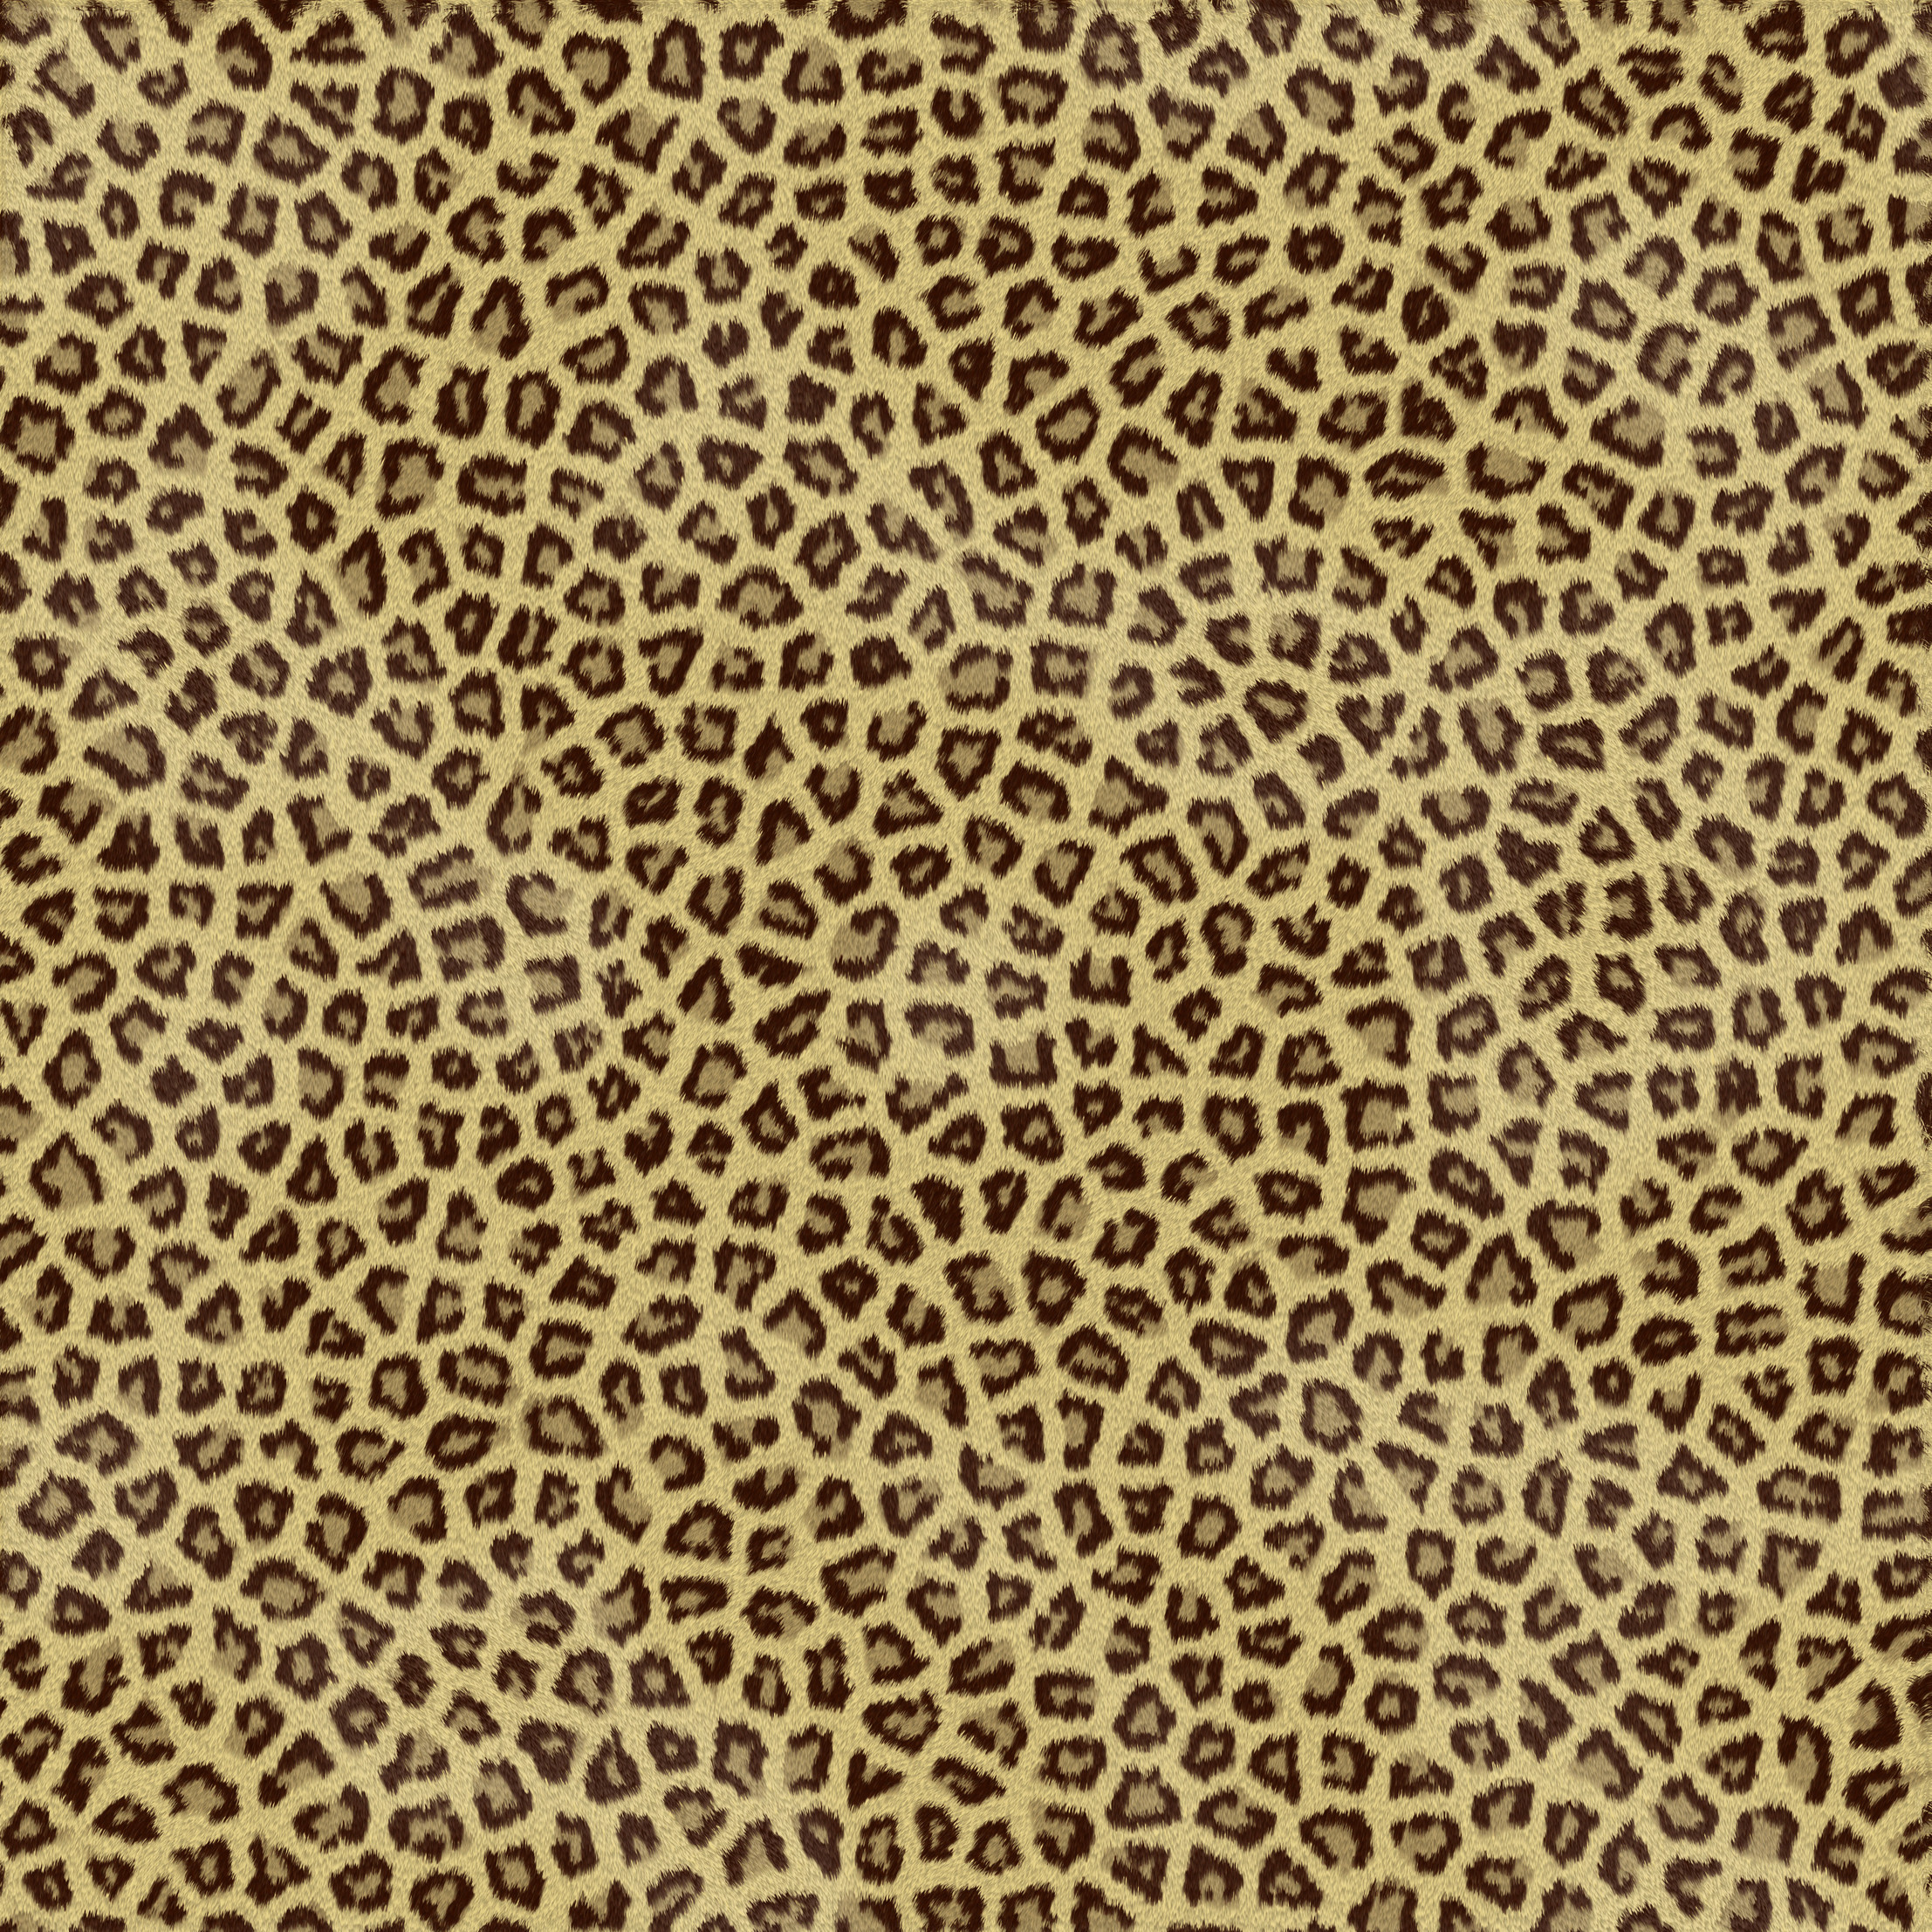 Cheetah Print Backgrounds submited images